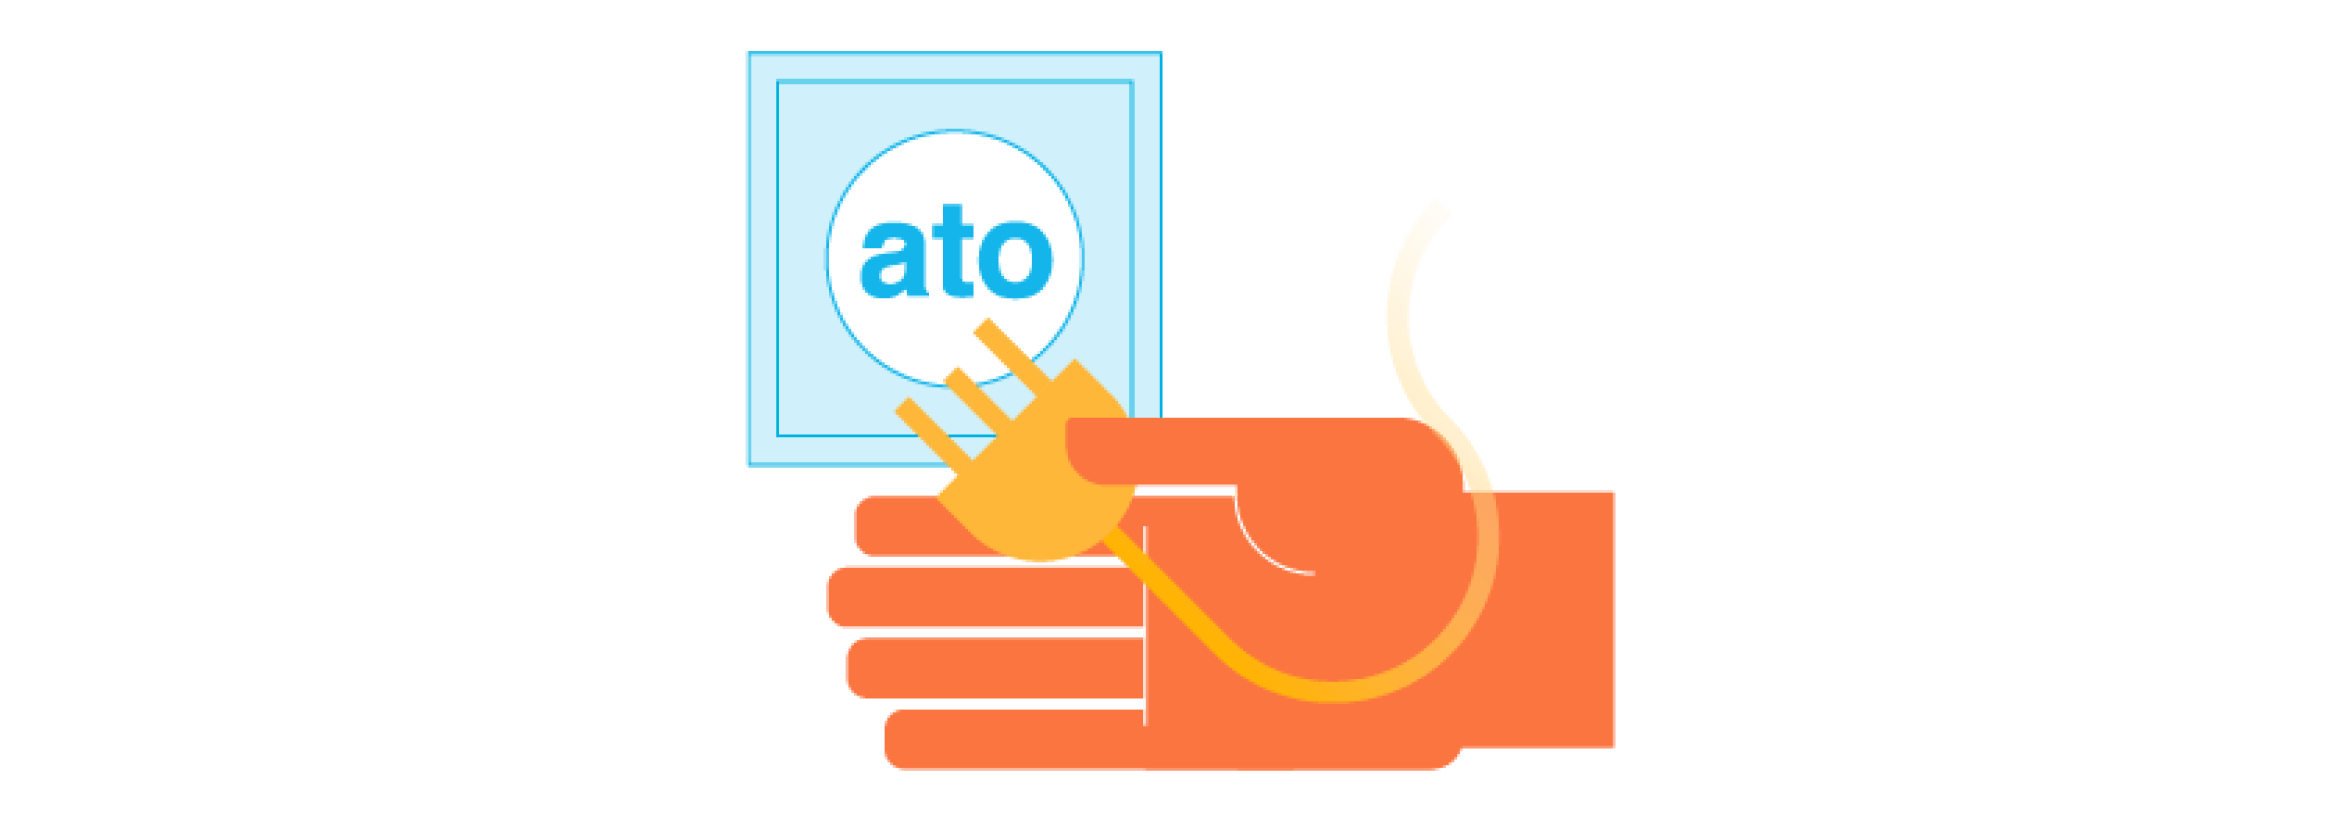 A hand holds plug and is about plug in to the ATO, representing a business connecting to the ATO online.